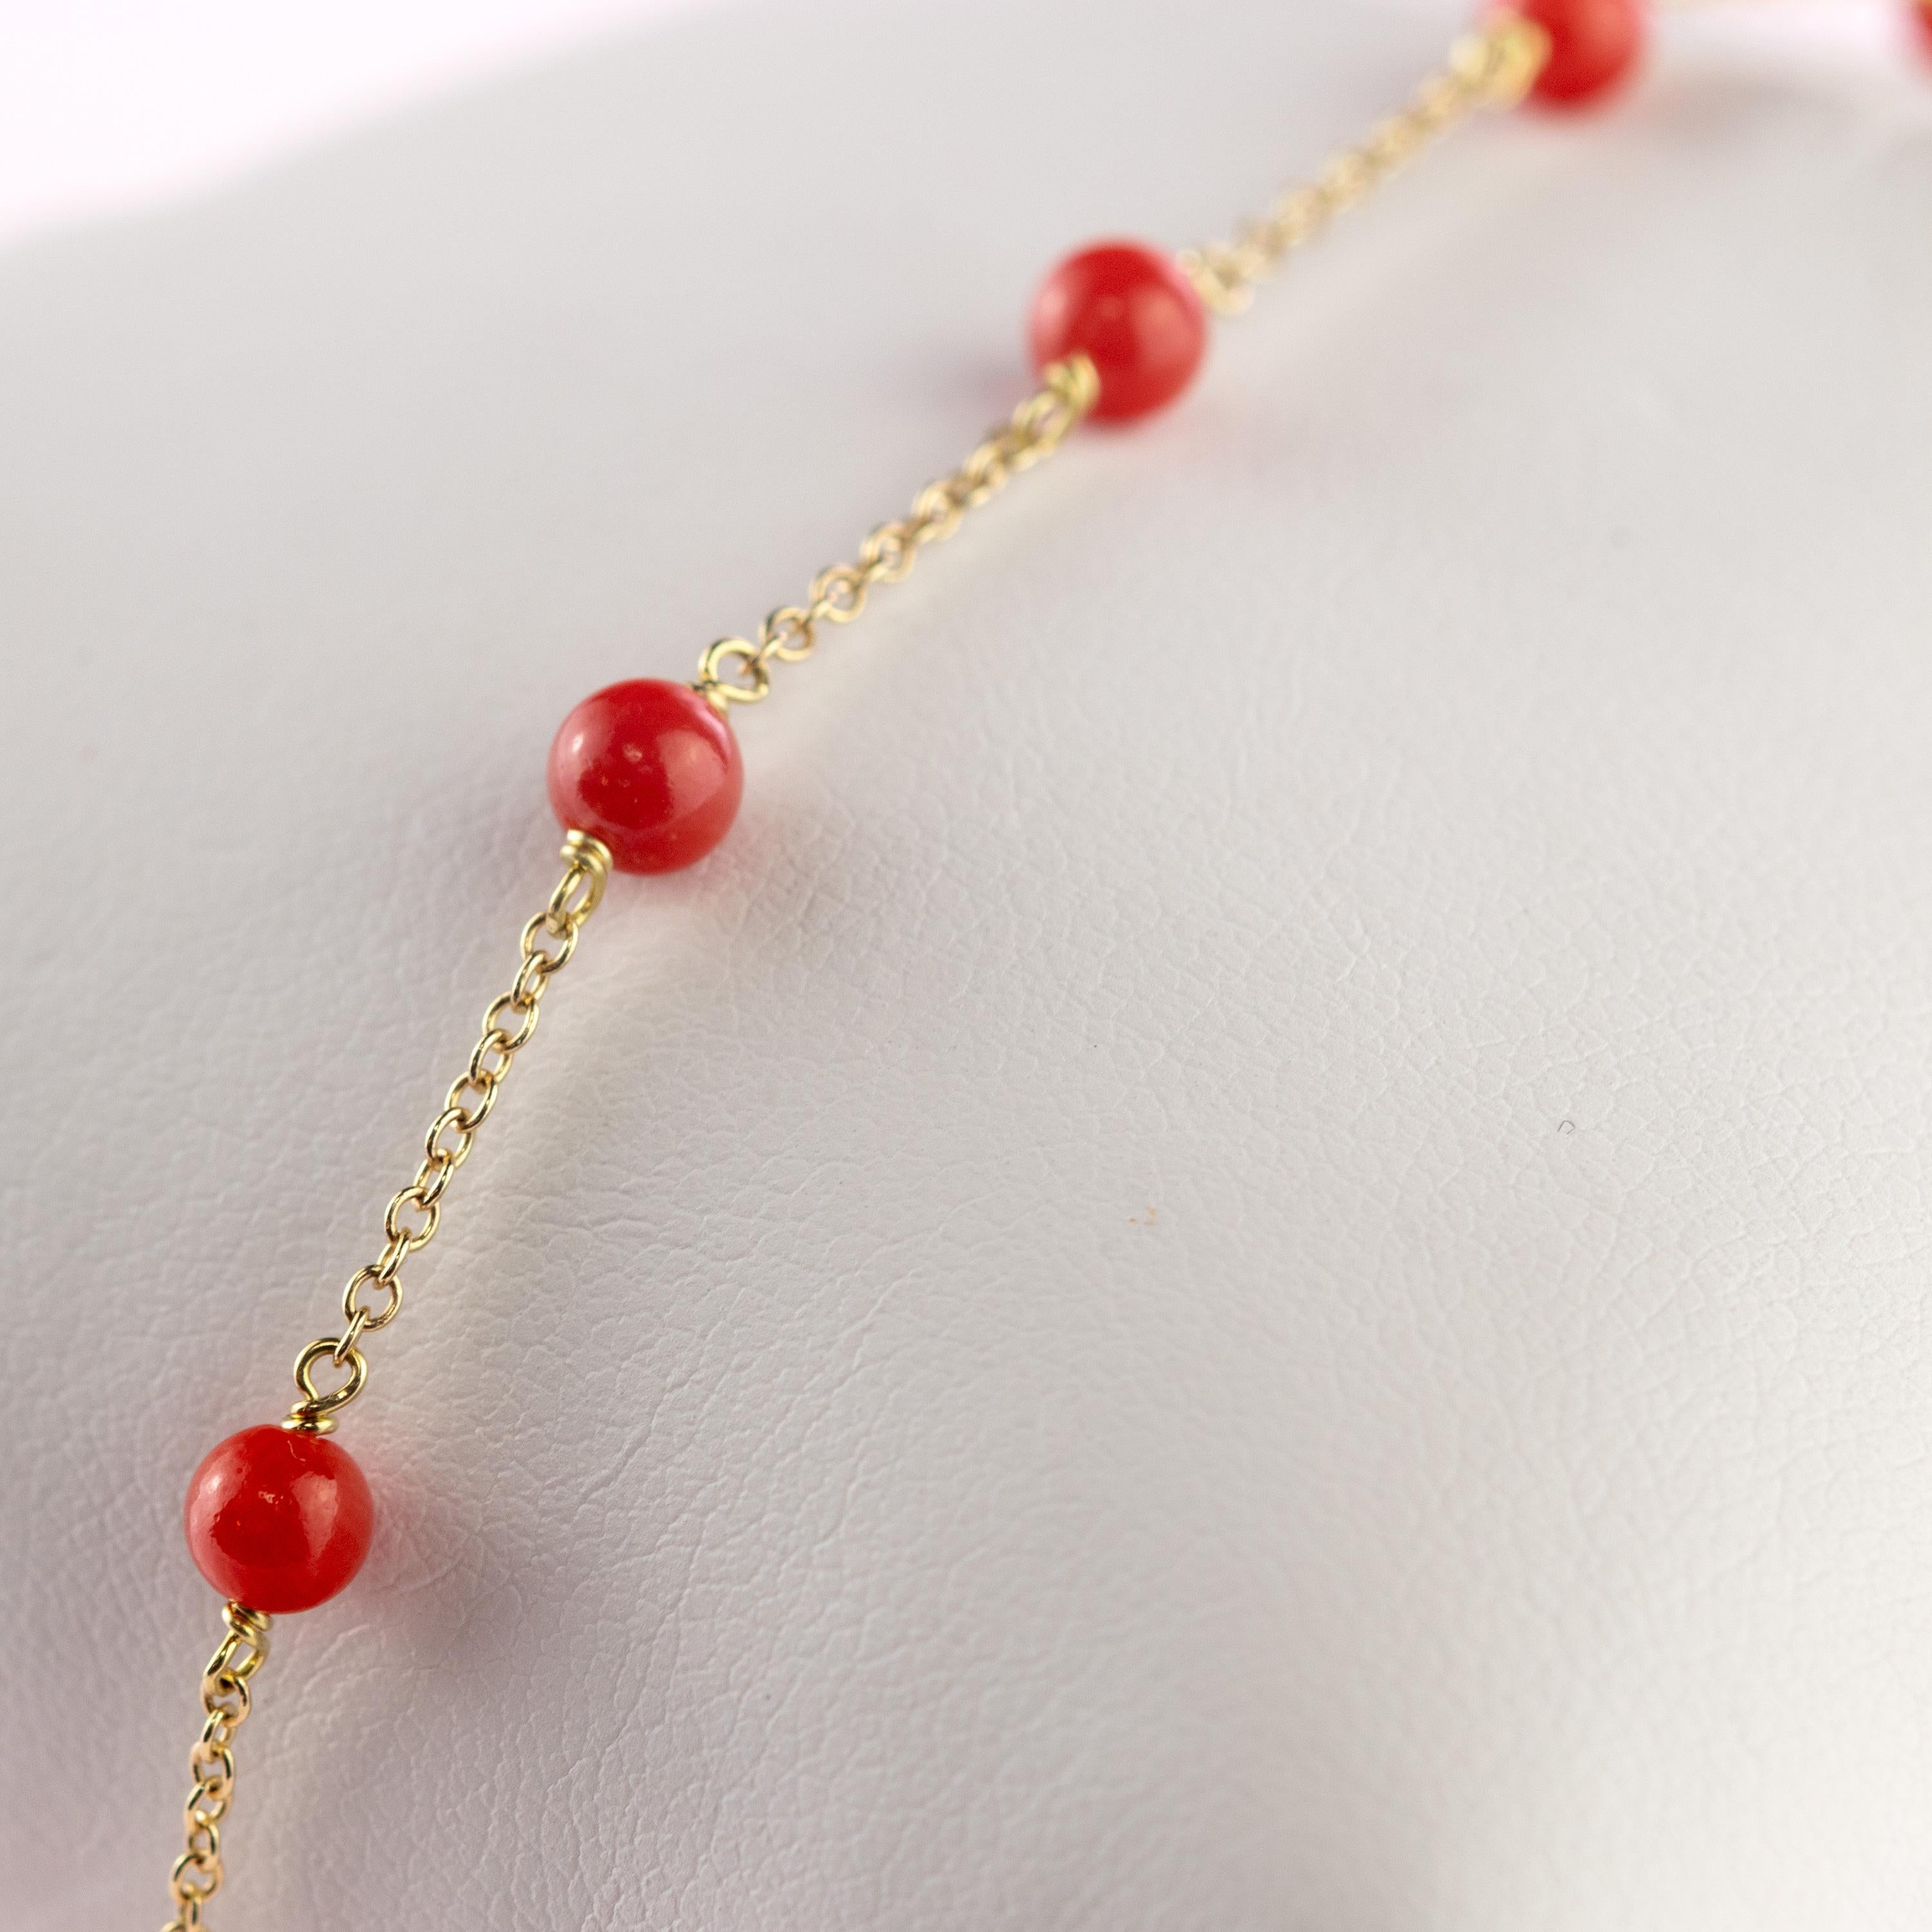 Marvellous bracelet starring pure red natural mediterranean coral spheres, for a bright charm of uniqueness. Luminous jewel with natural precious jewellery on elegant 9 karat yellow gold setting. Bracelet or Anklet.
 
The origin of coral is